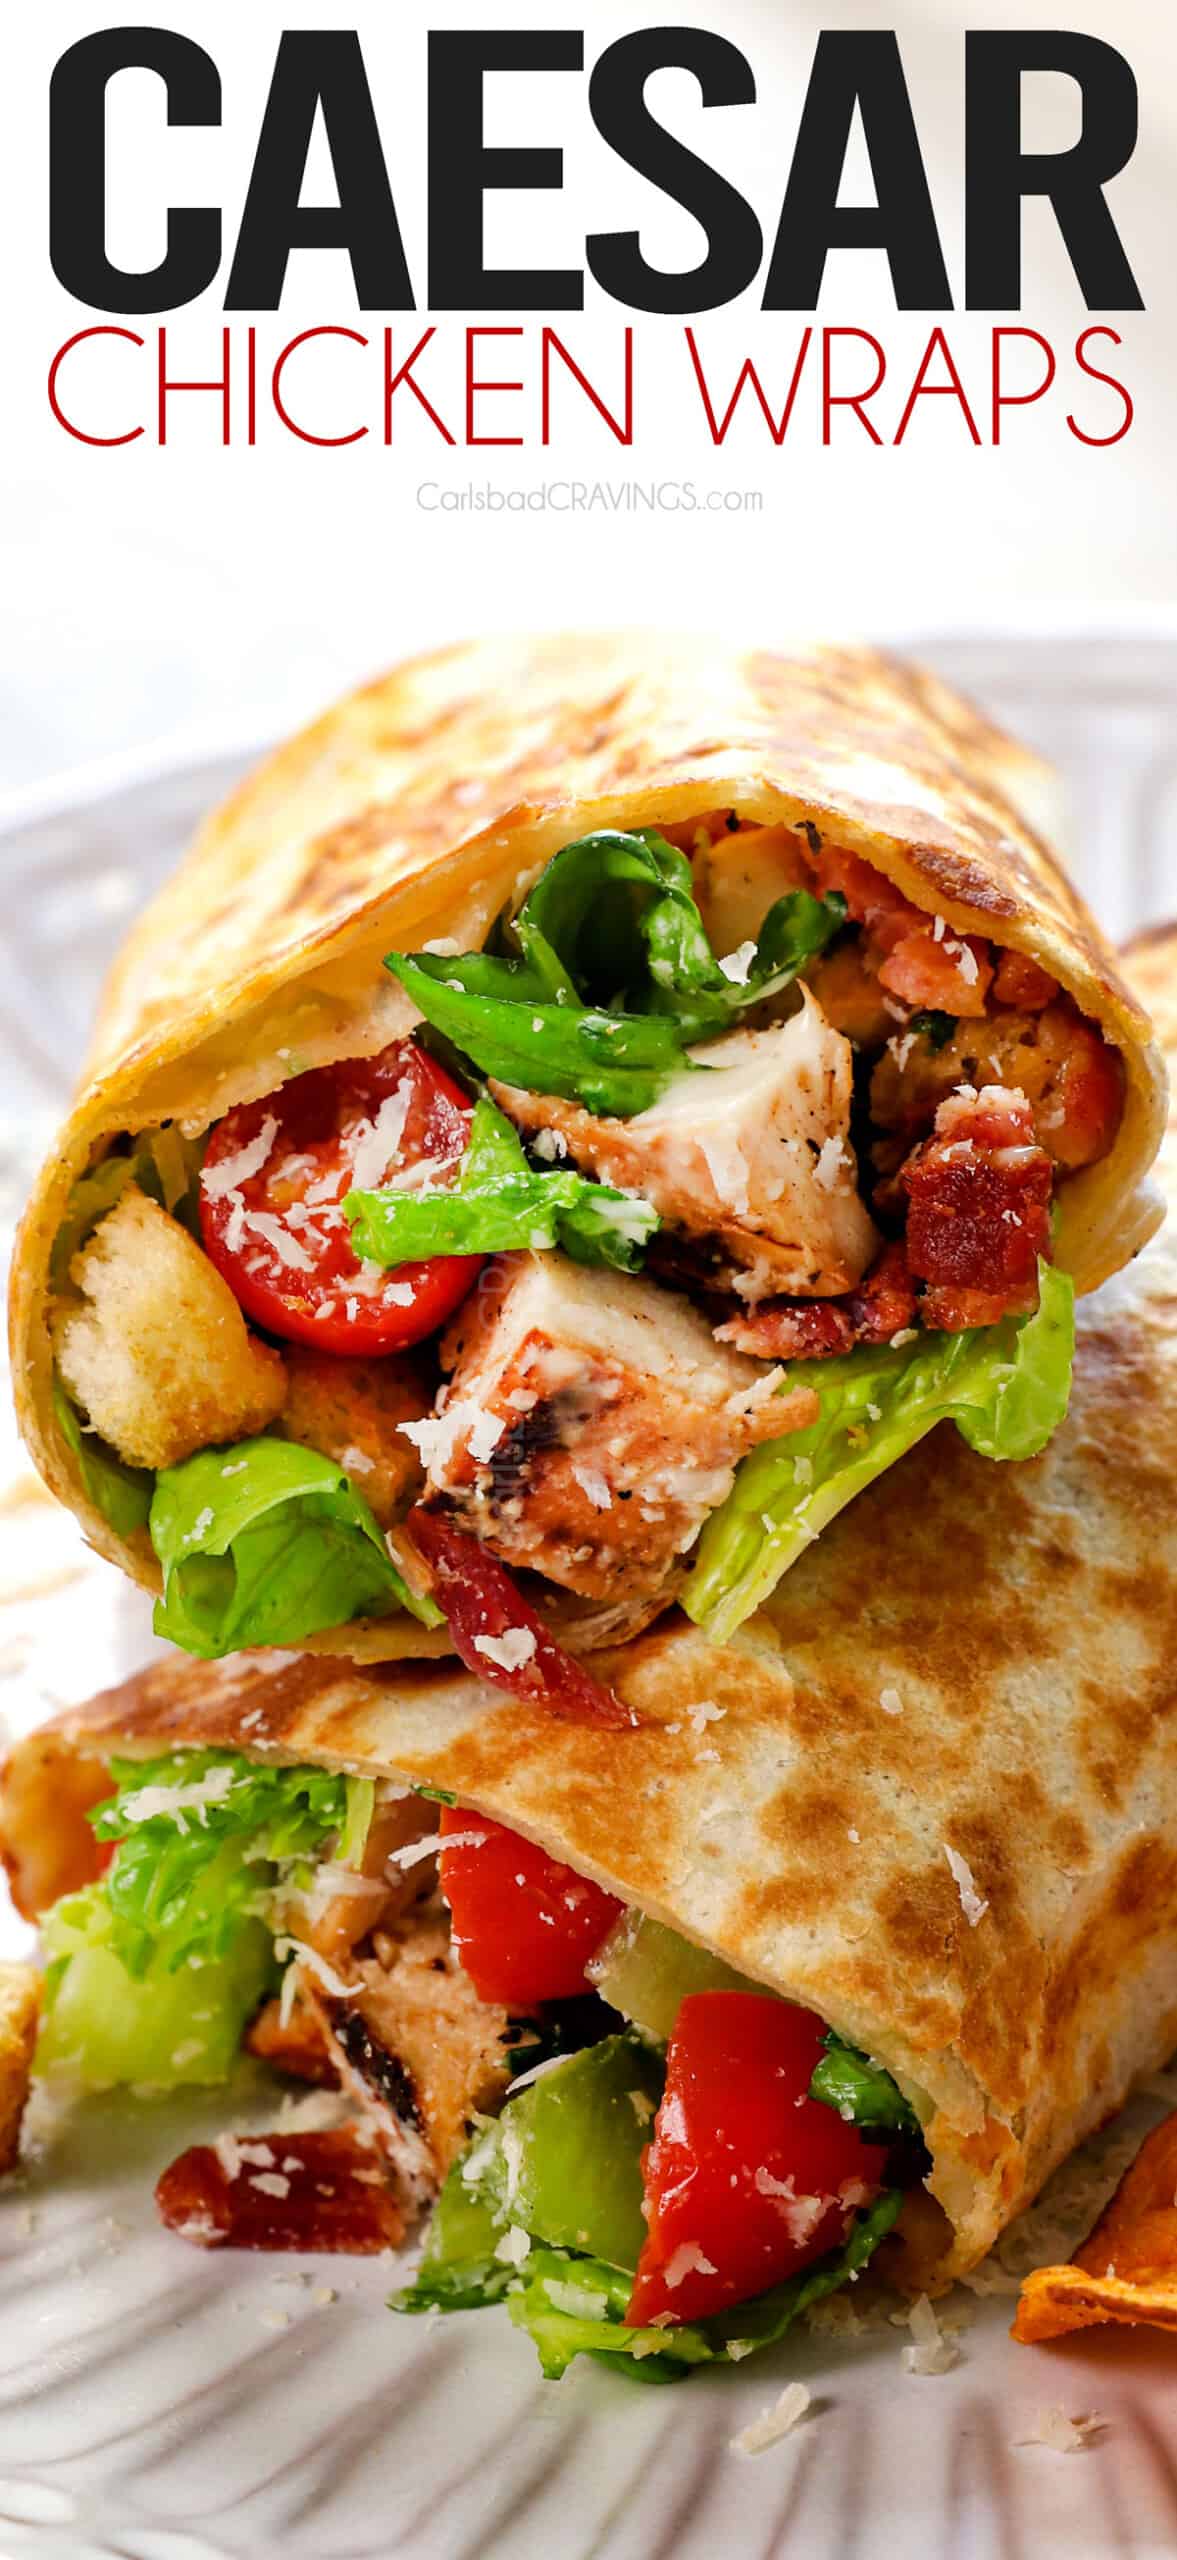 up close of Chicken Caesar Wrap showing the juicy chicken and crunchy lettuce